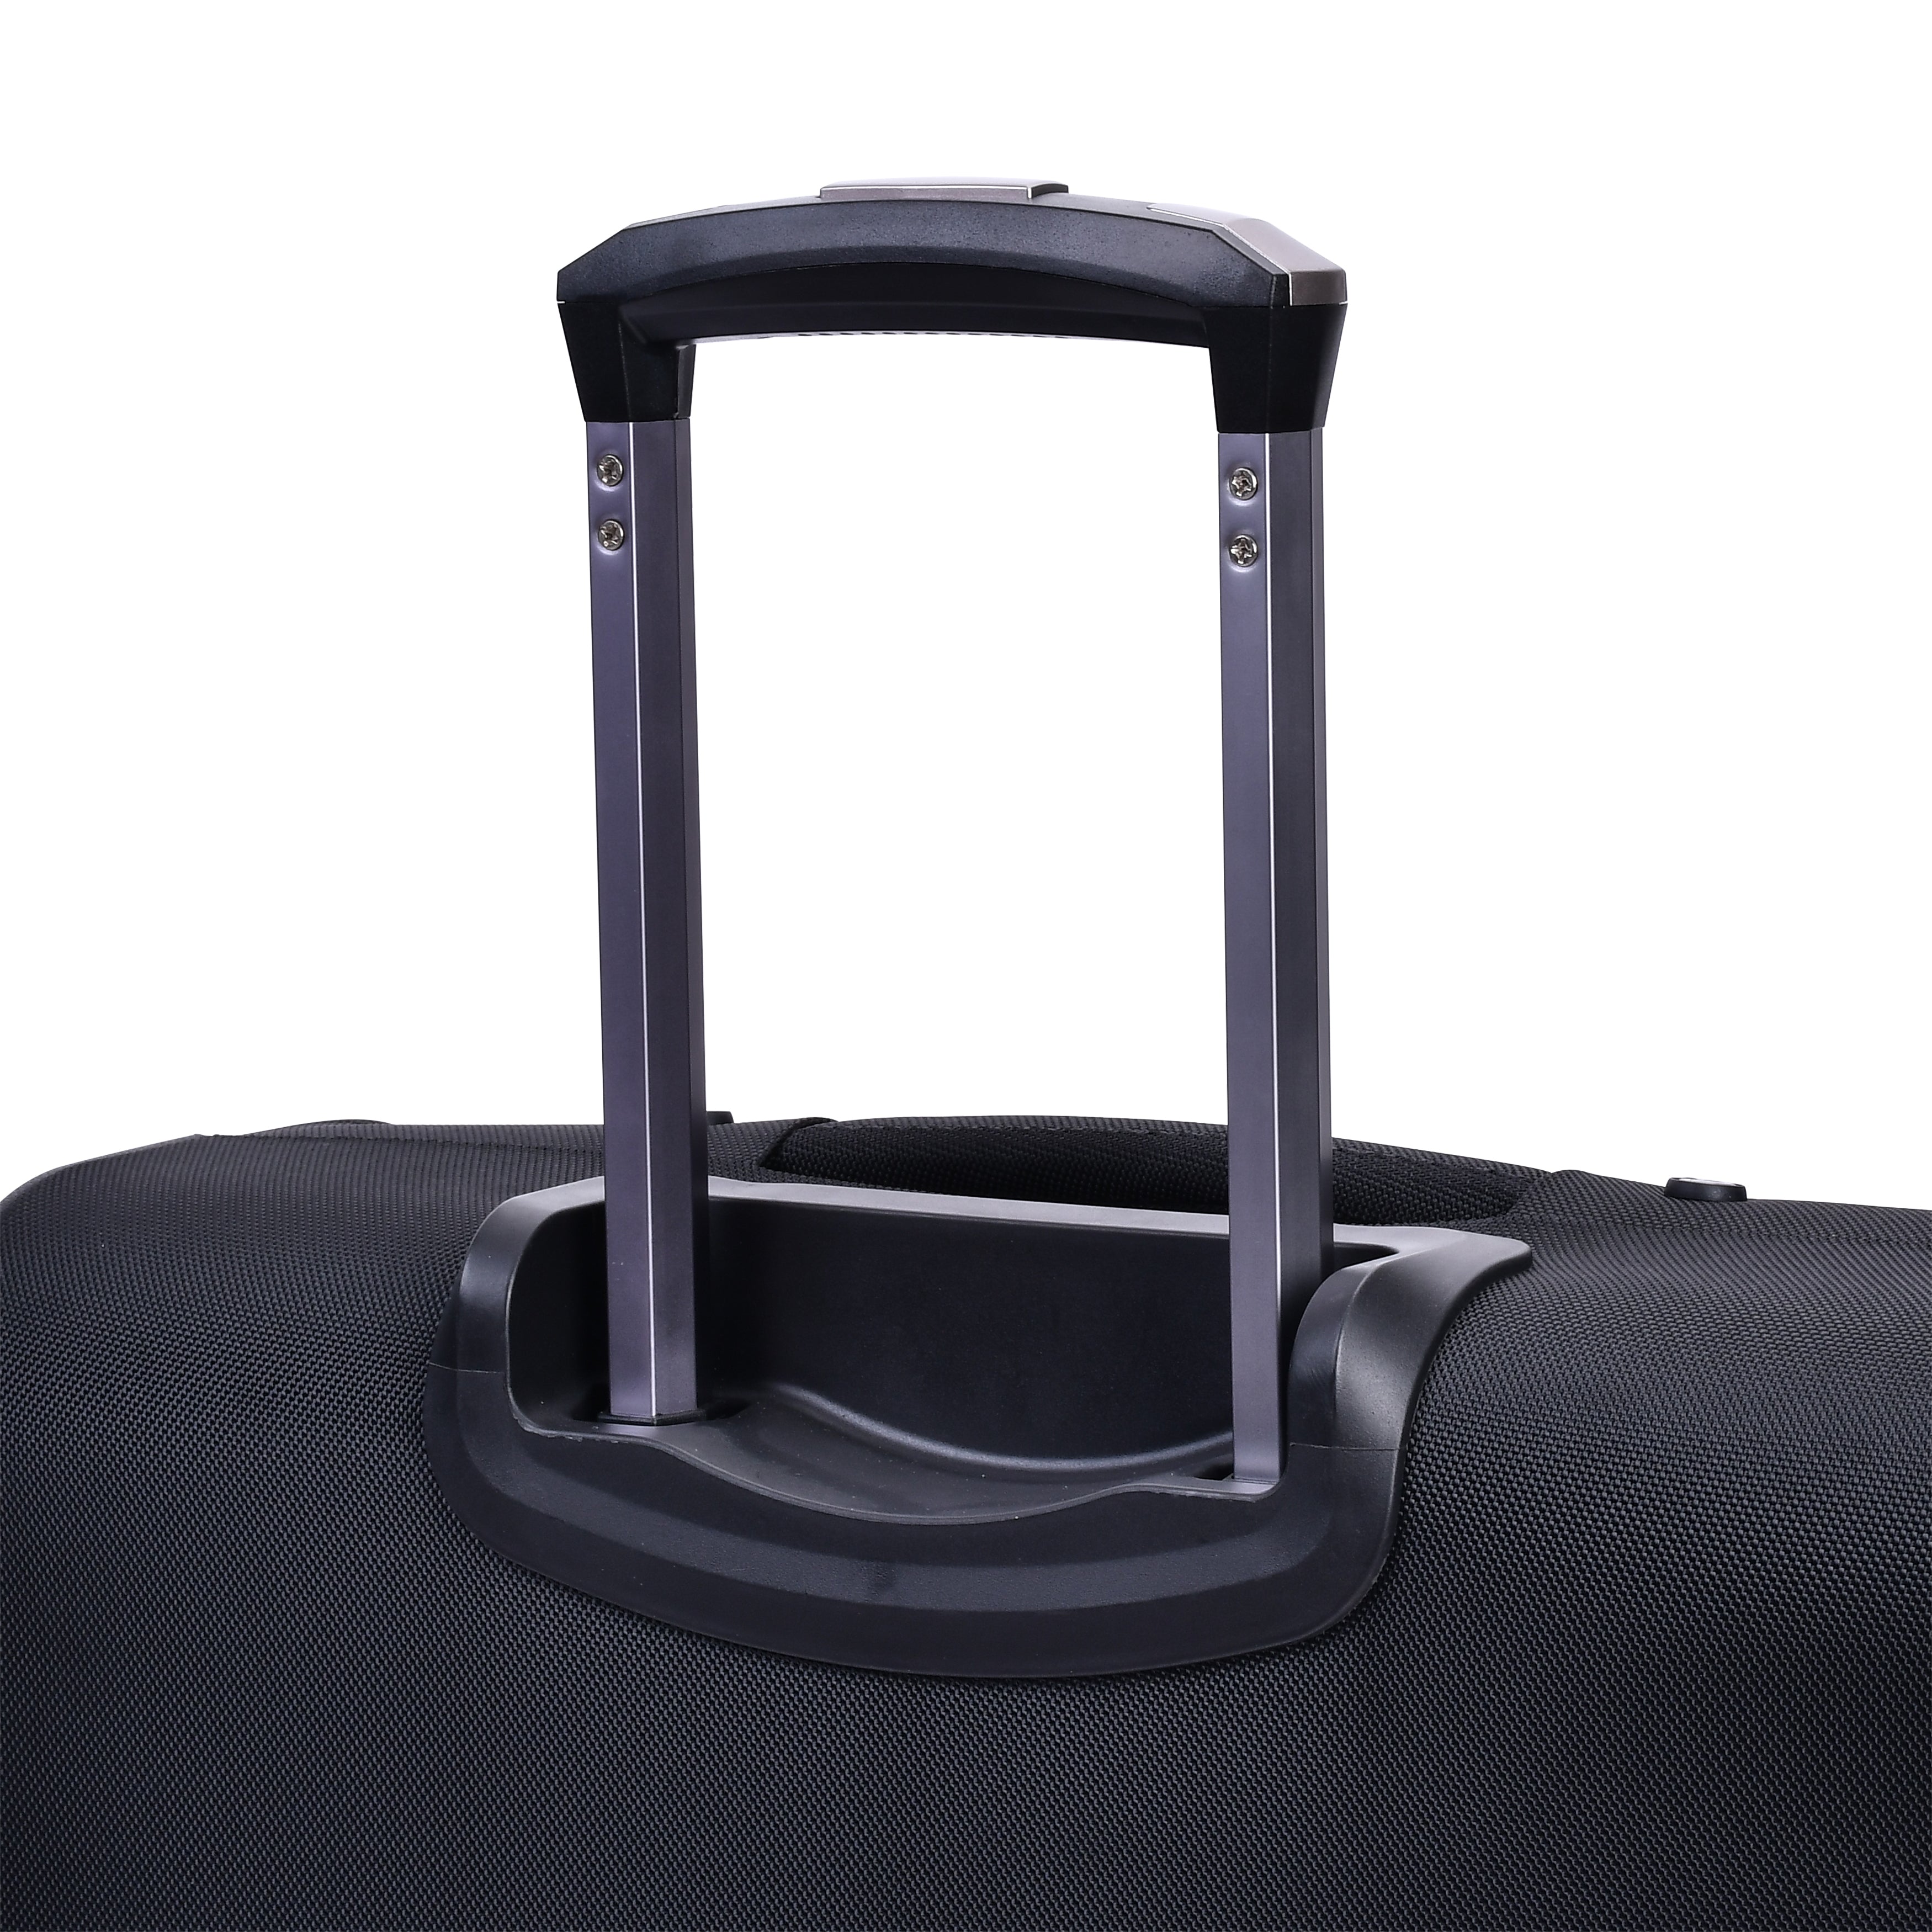 Eminent 4 360-degree Spinner Wheel Pilot Case Trolley water repellent rolling suitcase for Unisex, S0360-17